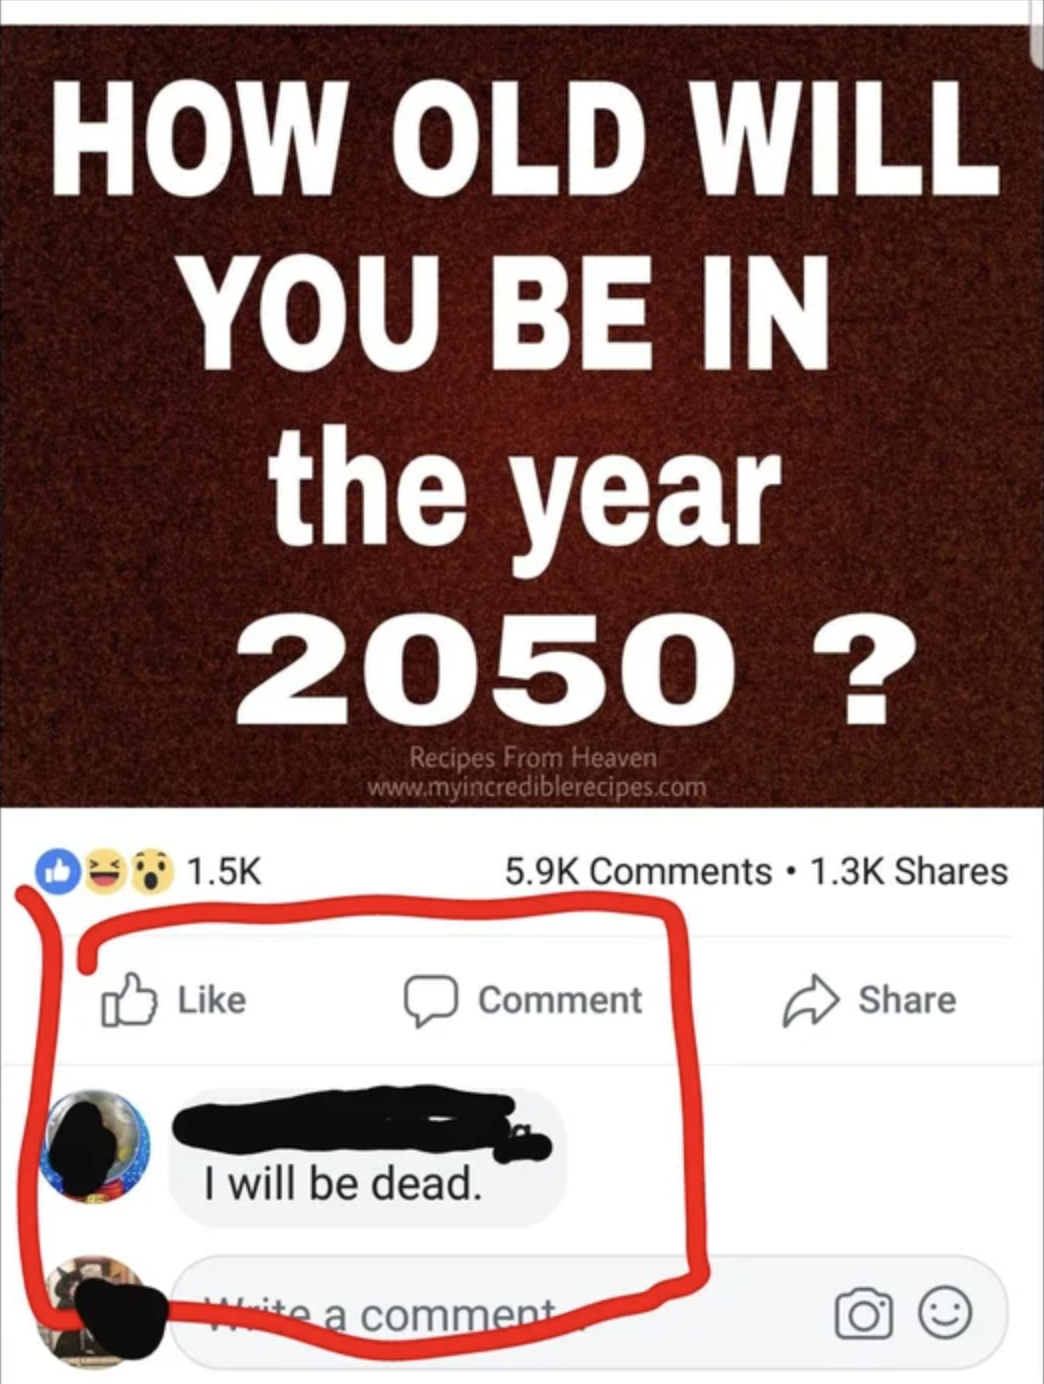 meme saying how old will you be in 2050 and someone responds i will be dead